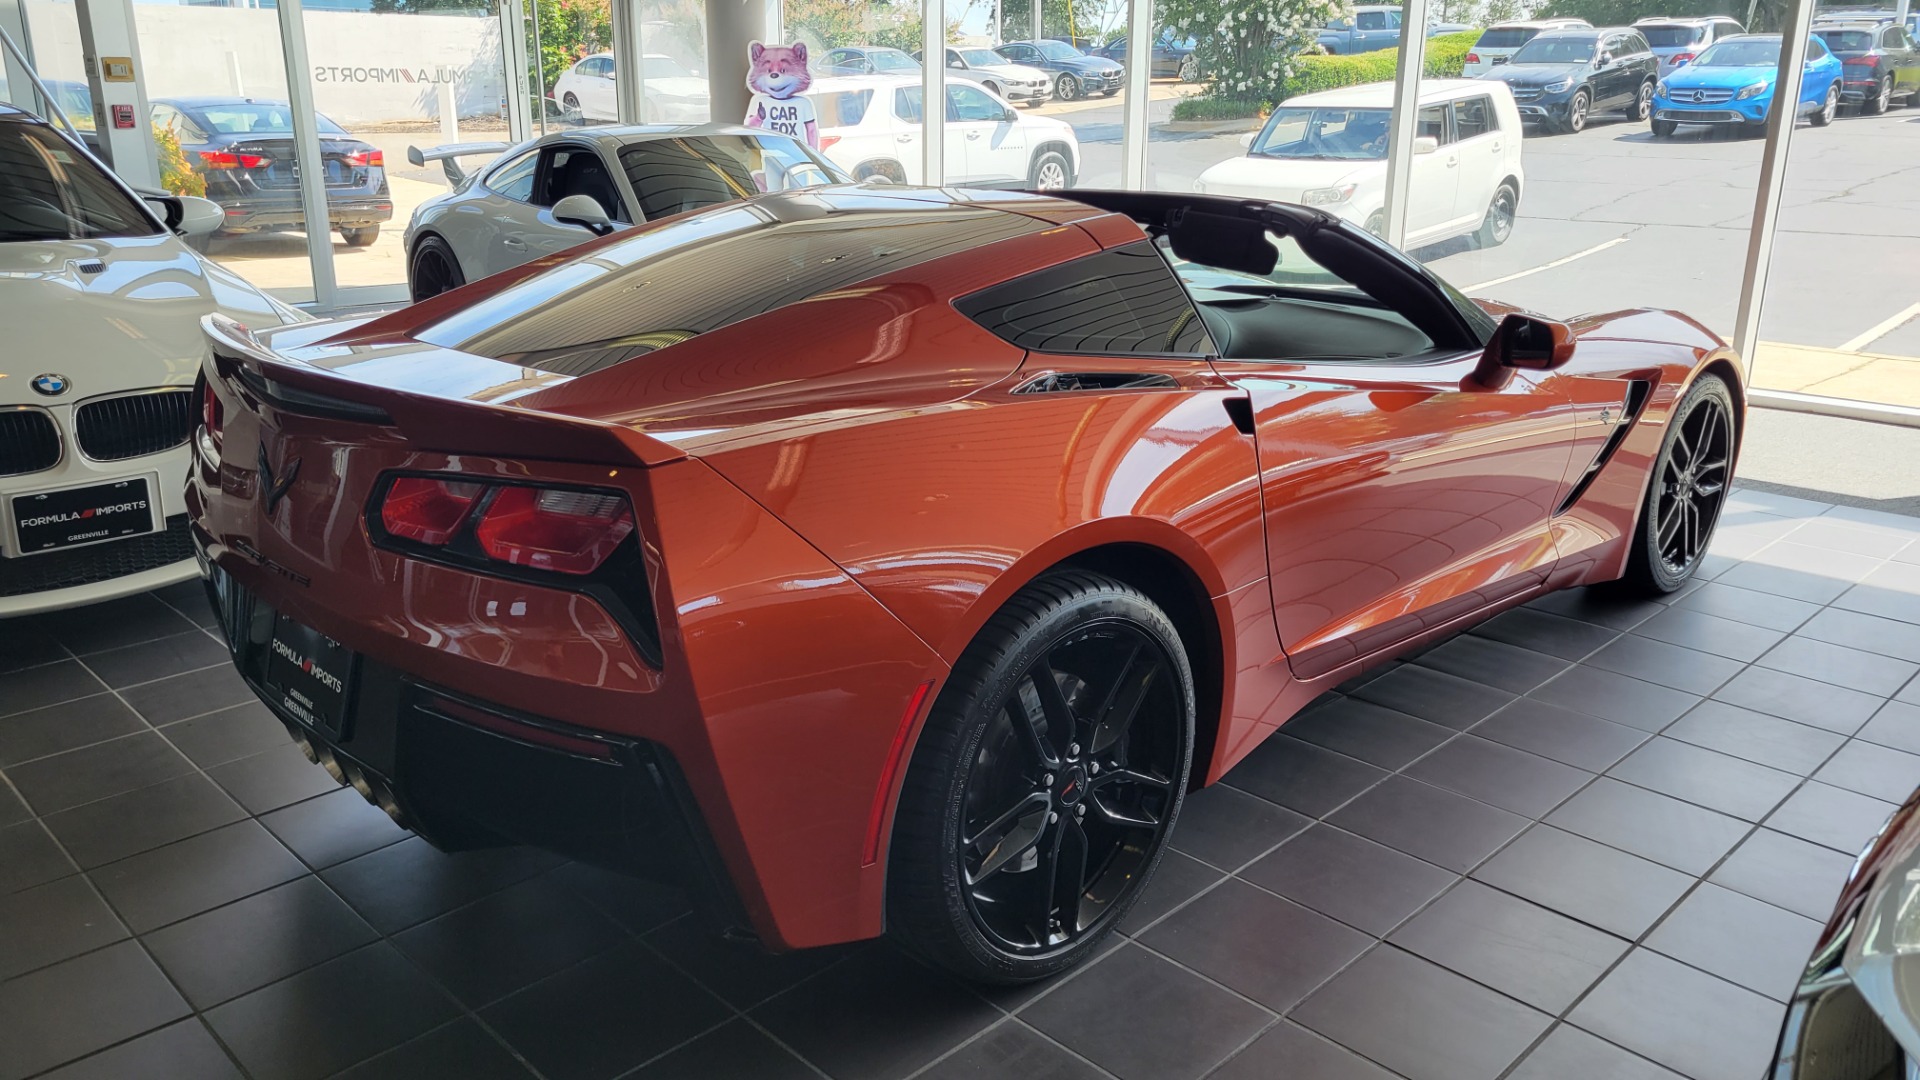 Used 2016 Chevrolet CORVETTE C7 COUPE / Z51 / 2LT / NAV / AUTO / PERF DATA & VIDEO RECORD for sale $56,495 at Formula Imports in Charlotte NC 28227 5